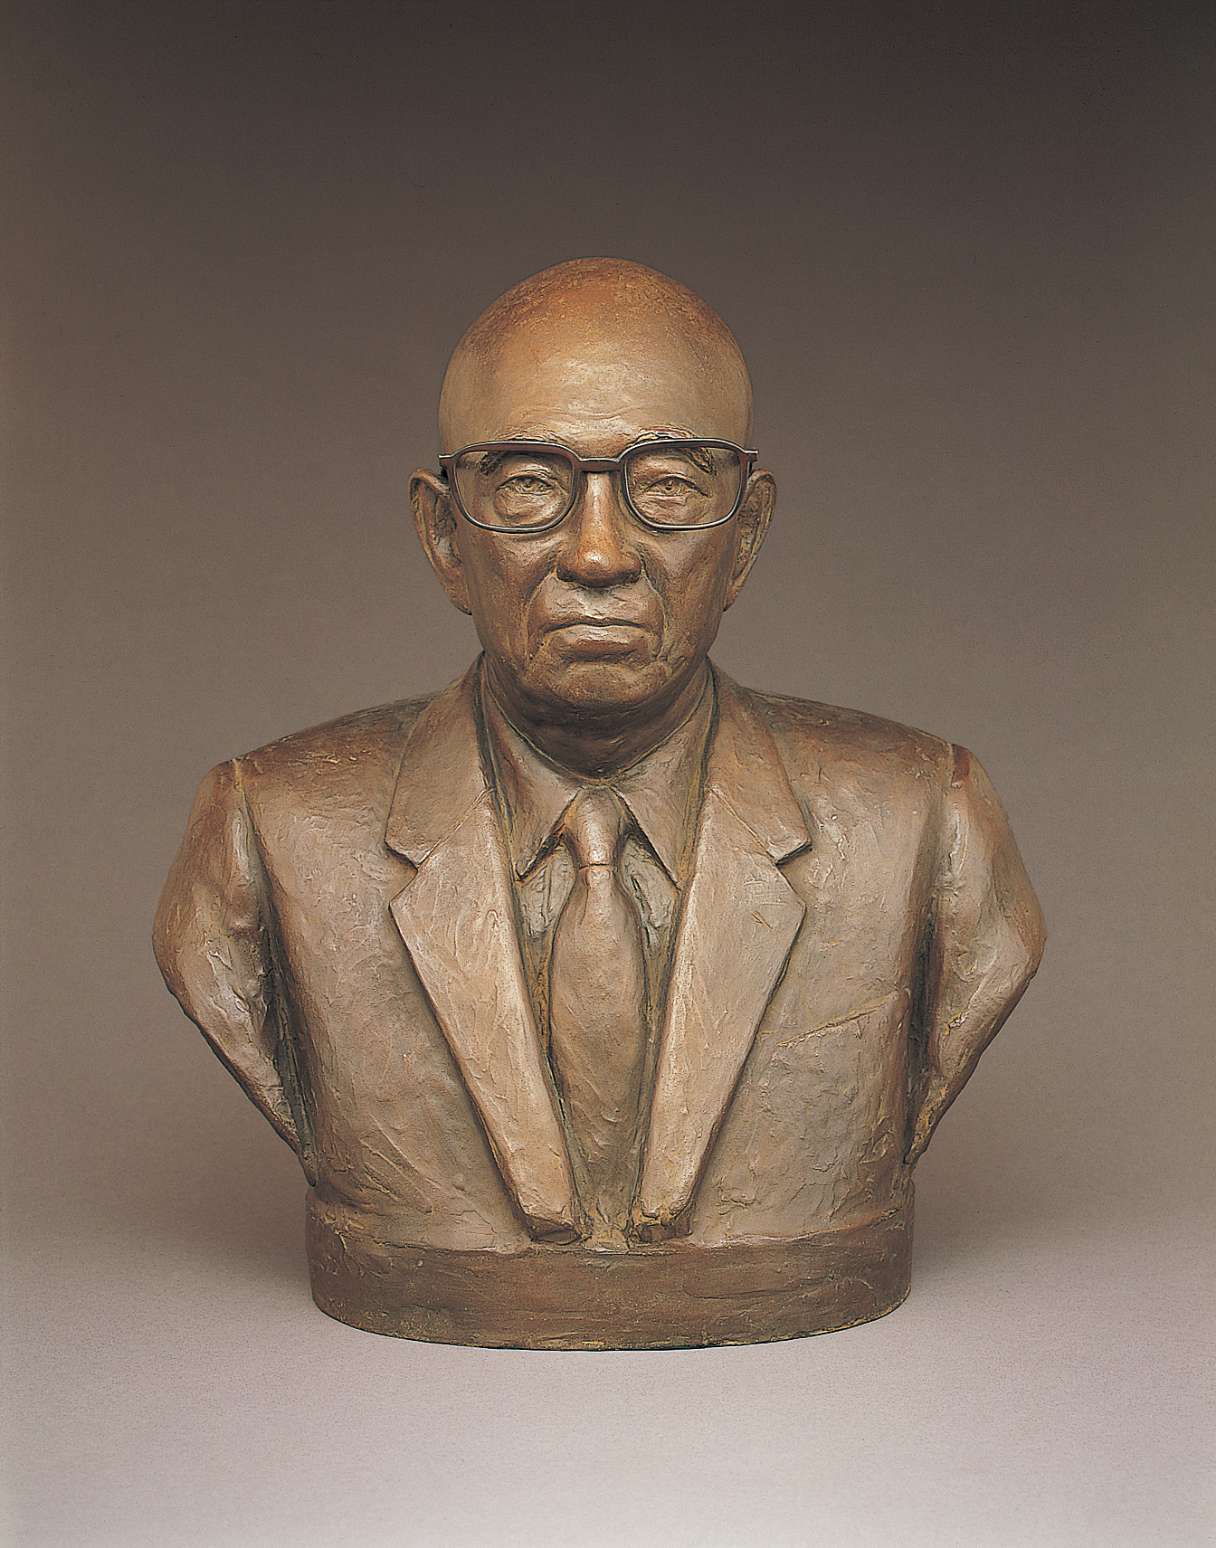 A brown hued bust of an older, bald Japanese man wearing glasses with large rectangular frames, dressed in a suit and tie. His eyes gazing directly ahead impart a look of dignified determination.